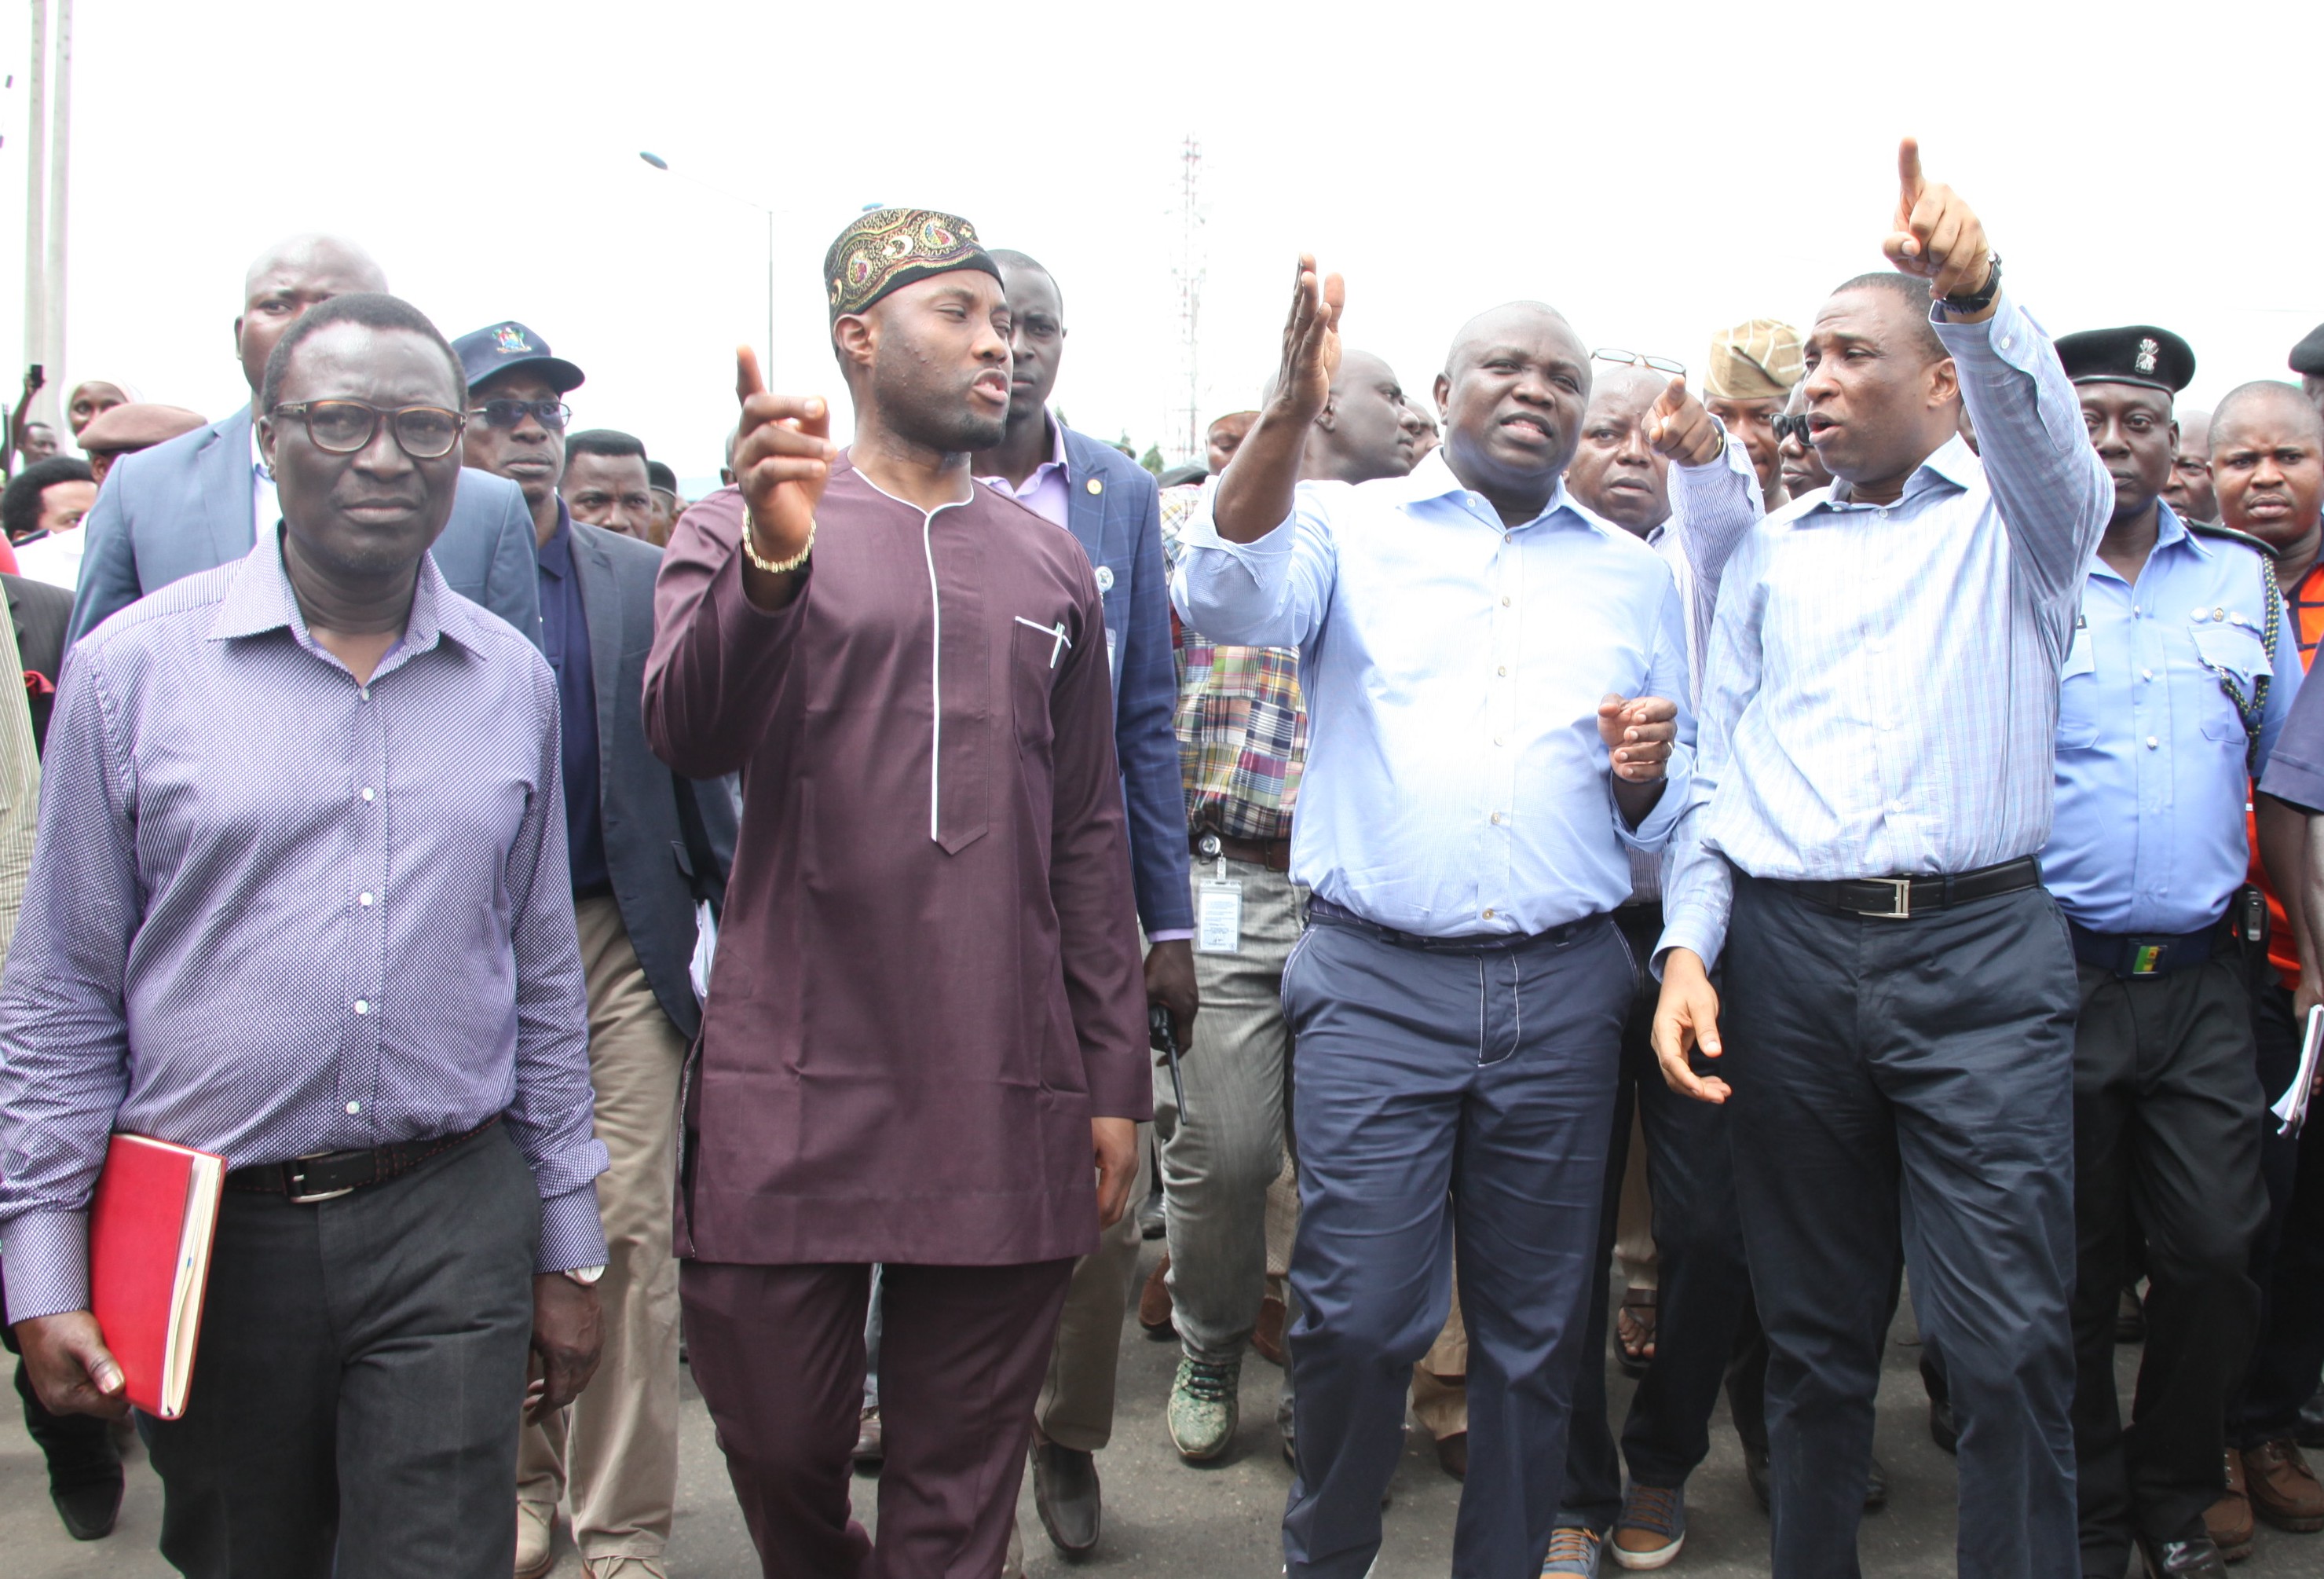 Lagos State Governor, Mr. Akinwunmi Ambode (2nd right) with the Secretary to the State Government, Mr Tunji Bello (right), the General Manager, Lagos State Public Works Corporation, Engr. Ayo Sodeinde (left) and the Executive Secretary, Oshodi Local Government, Mr. Daud Adeola Olajobi (2nd left)and Engr. Abraham Afolabi Peters (right) during the Governor’s inspection of Brown Street for rehabilitation at Oshodi, on Wednesday, August 19, 2015.